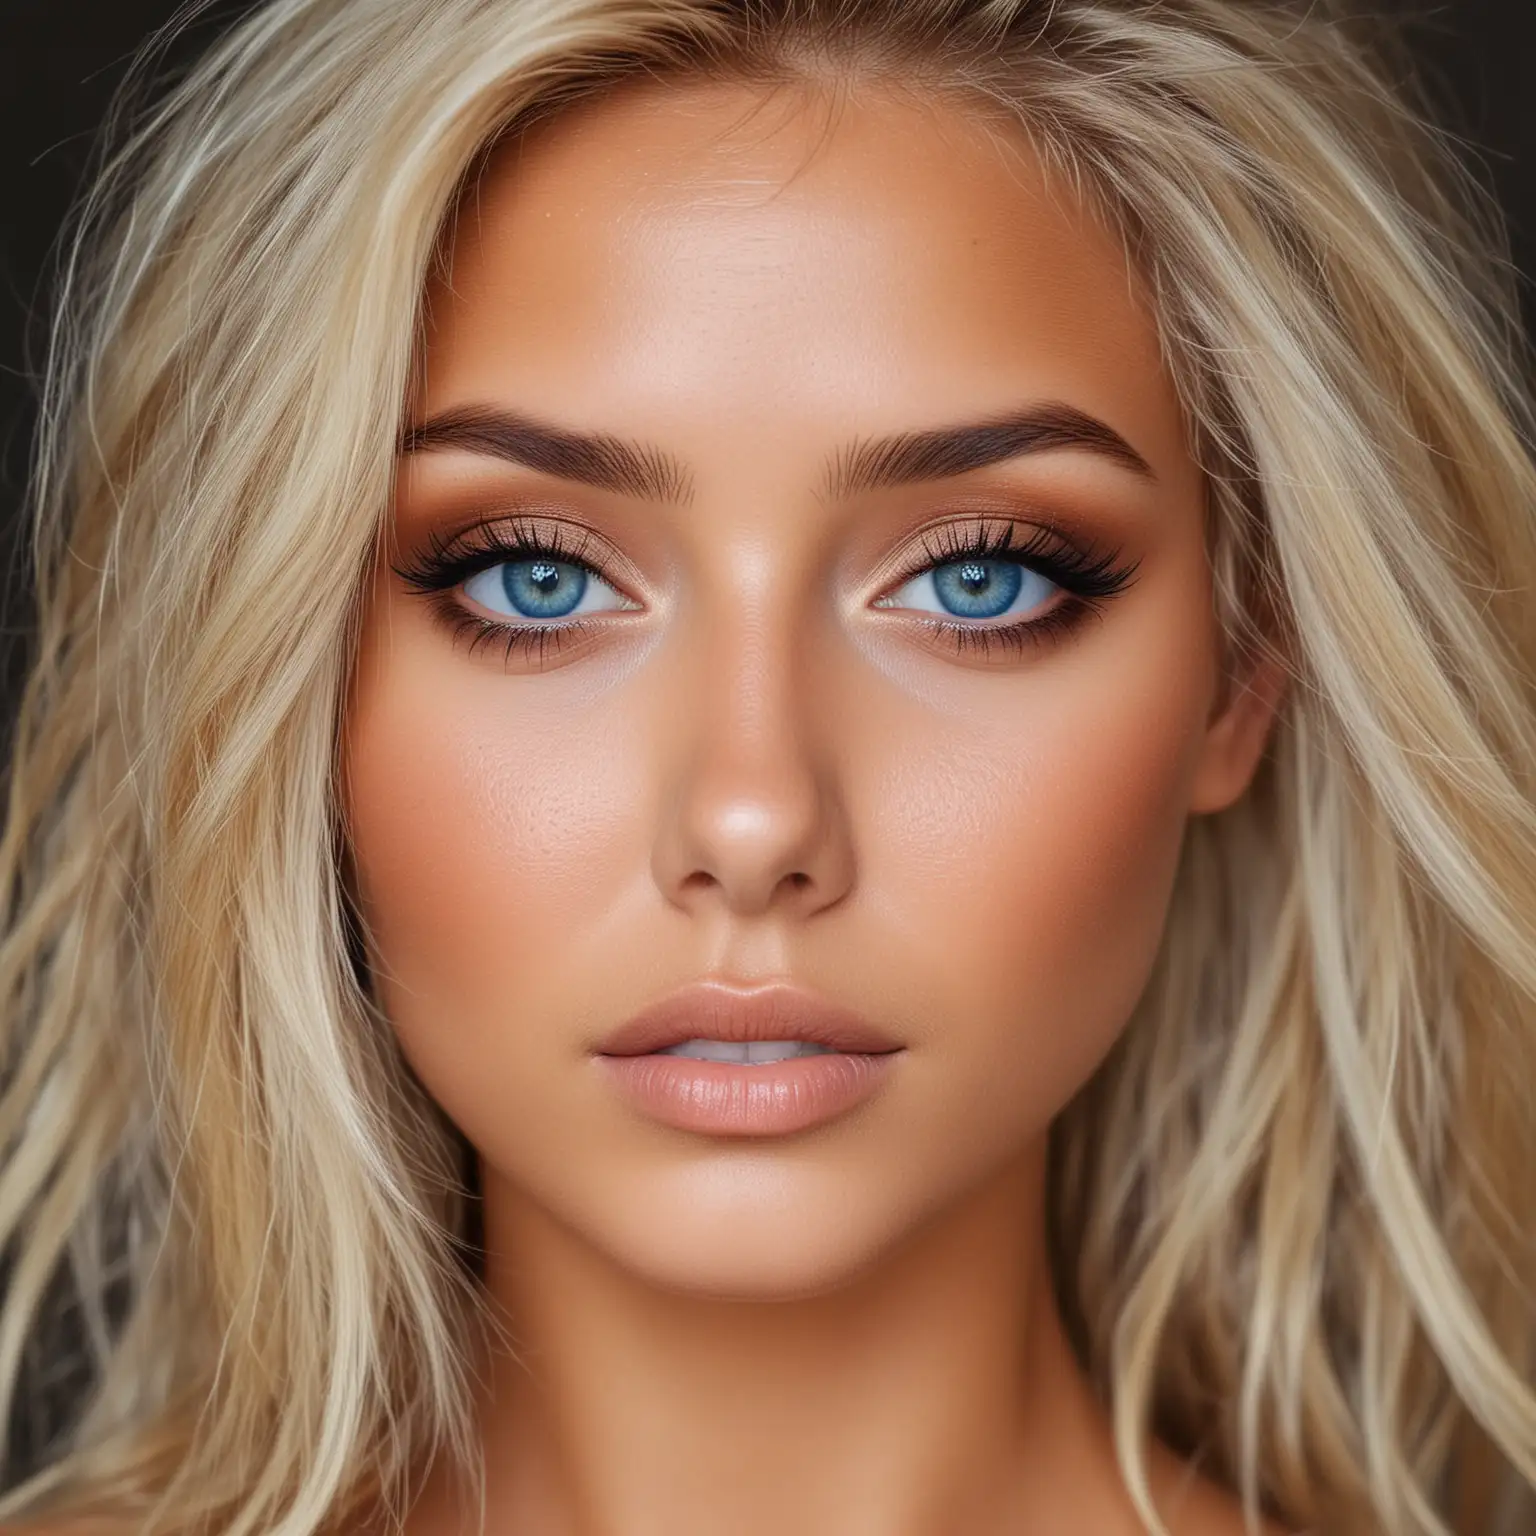 most beautiful woman in the world blonde hair, blues eyes, tan skin, beauty mark light black  under left eye, perfect pro makeup on face.